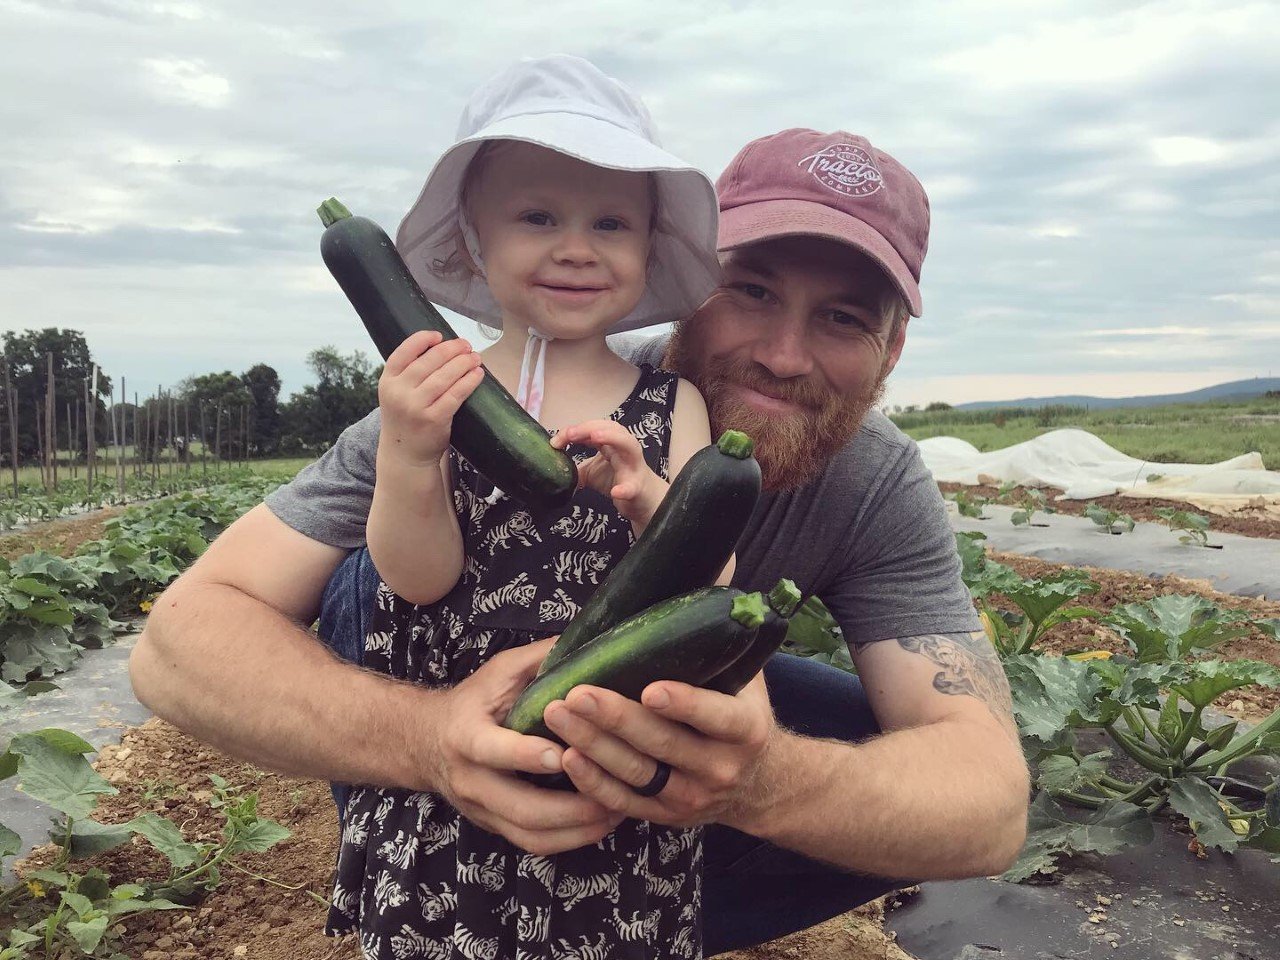 Tuesday CSA: Dickinson College Farm Field Notes for Week of July 22nd